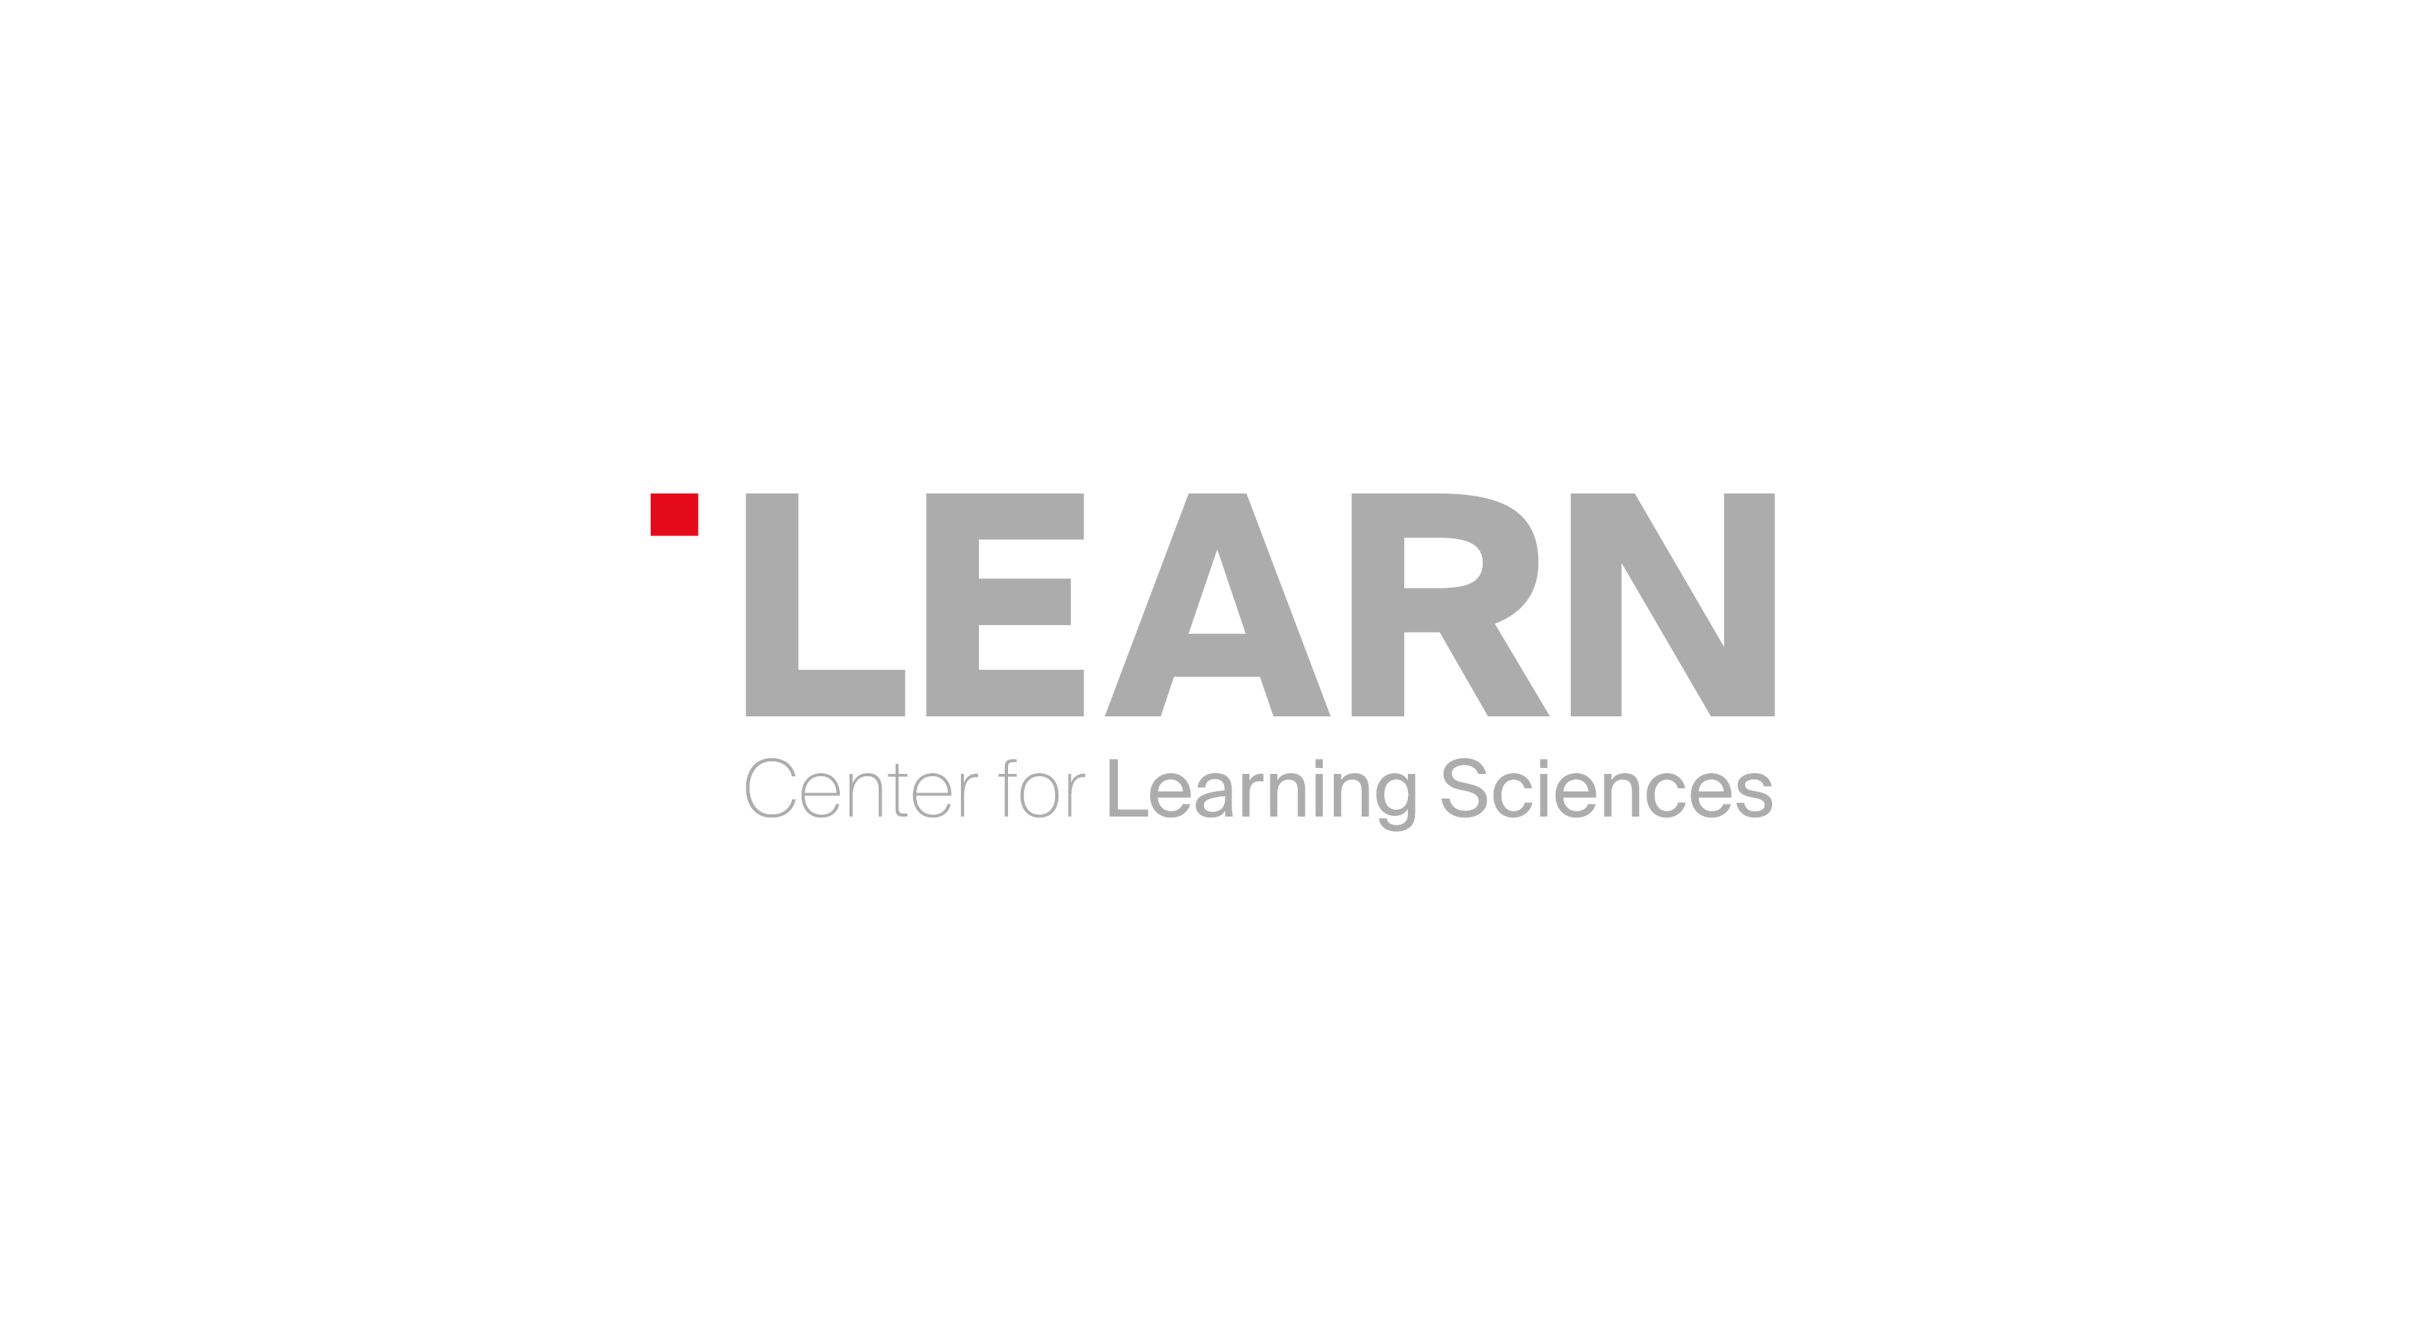 LEARN Center for Learning Sciences